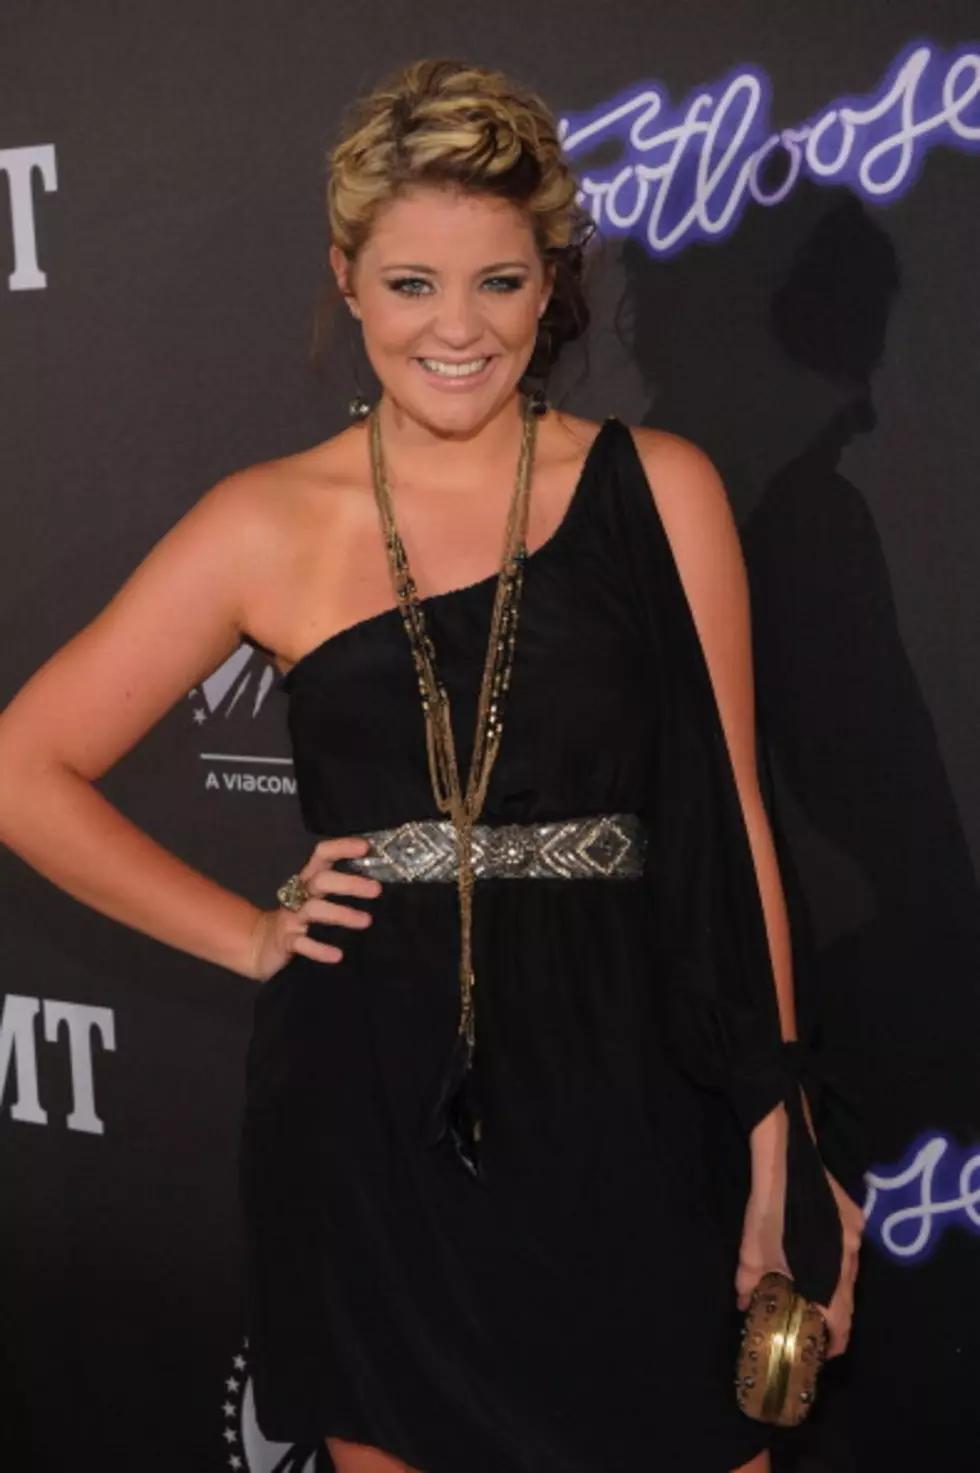 Trace Beats Chesney By One Vote – Now Takes On Lauren Alaina [AUDIO]